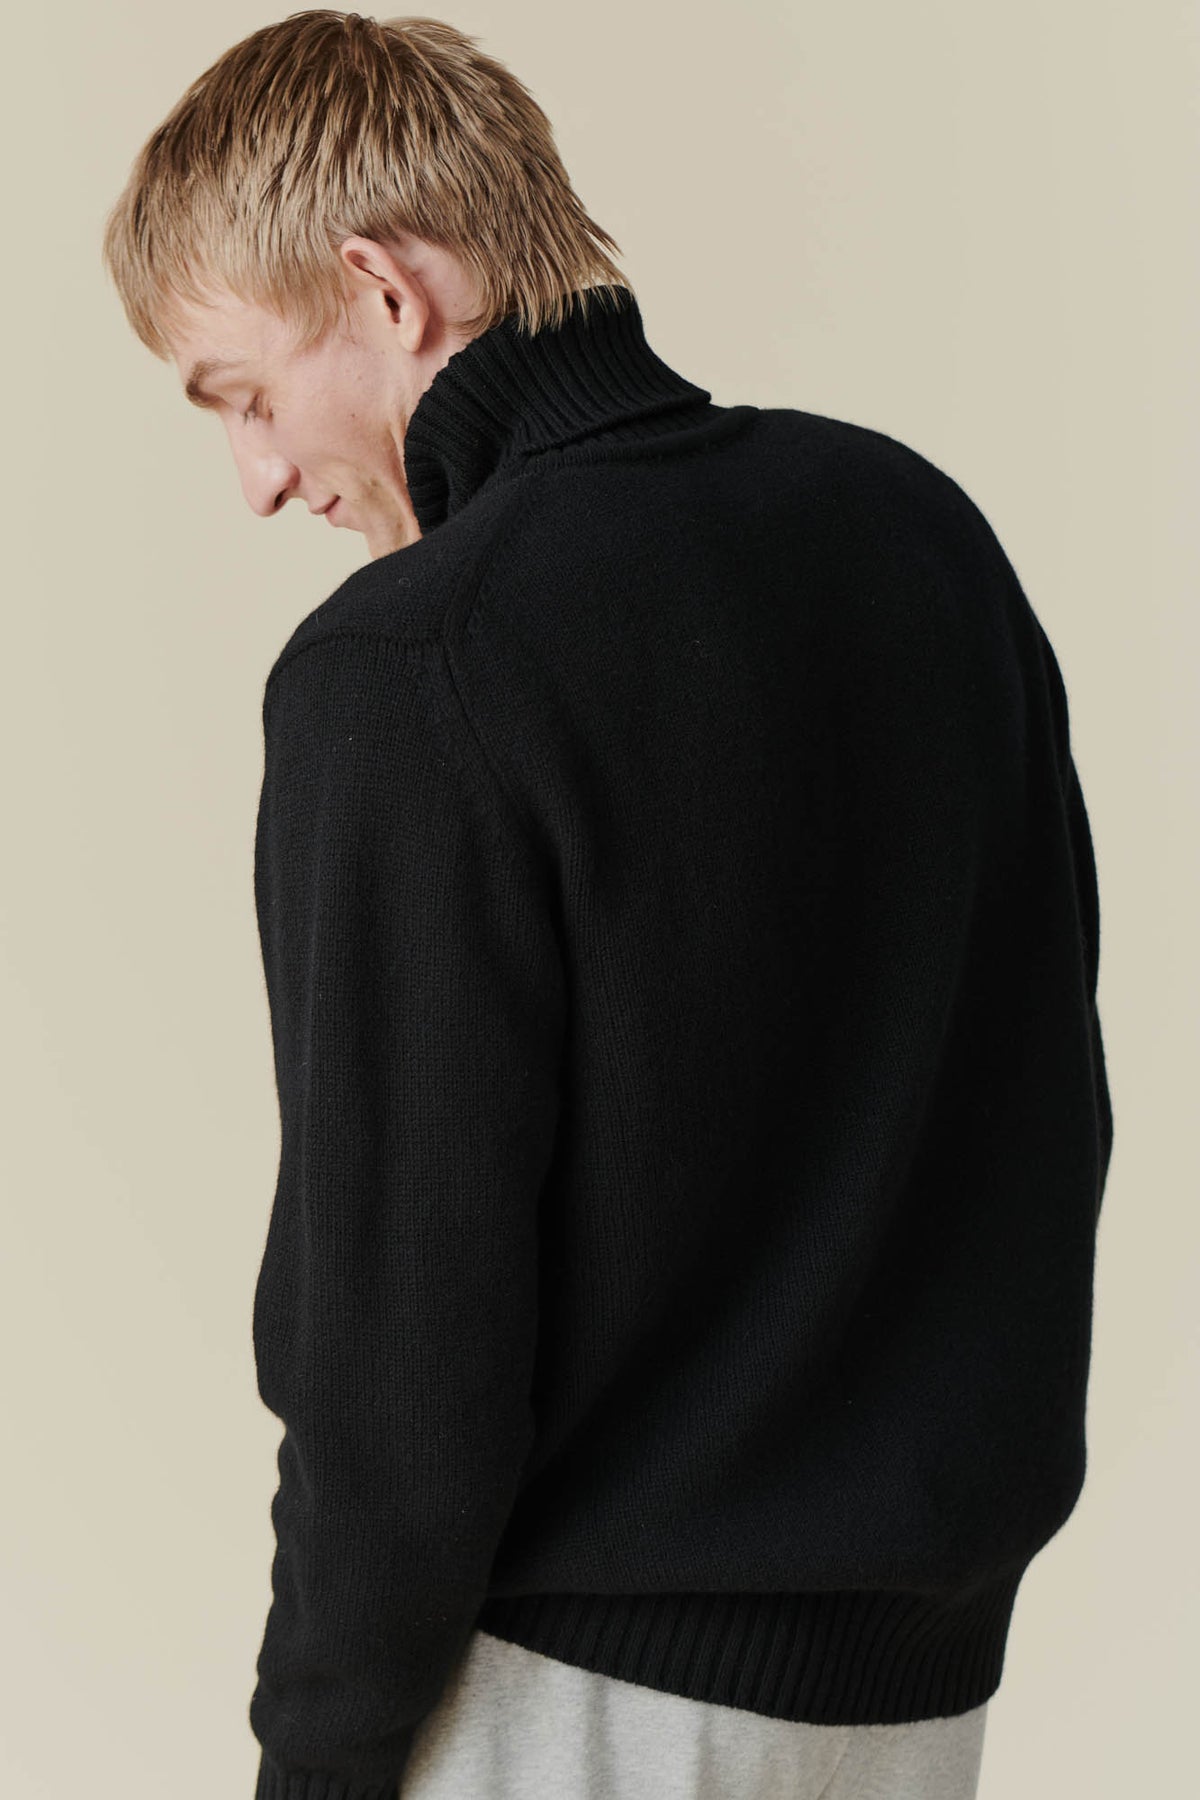 
            Back of white male wearing lambswool roll neck in black.